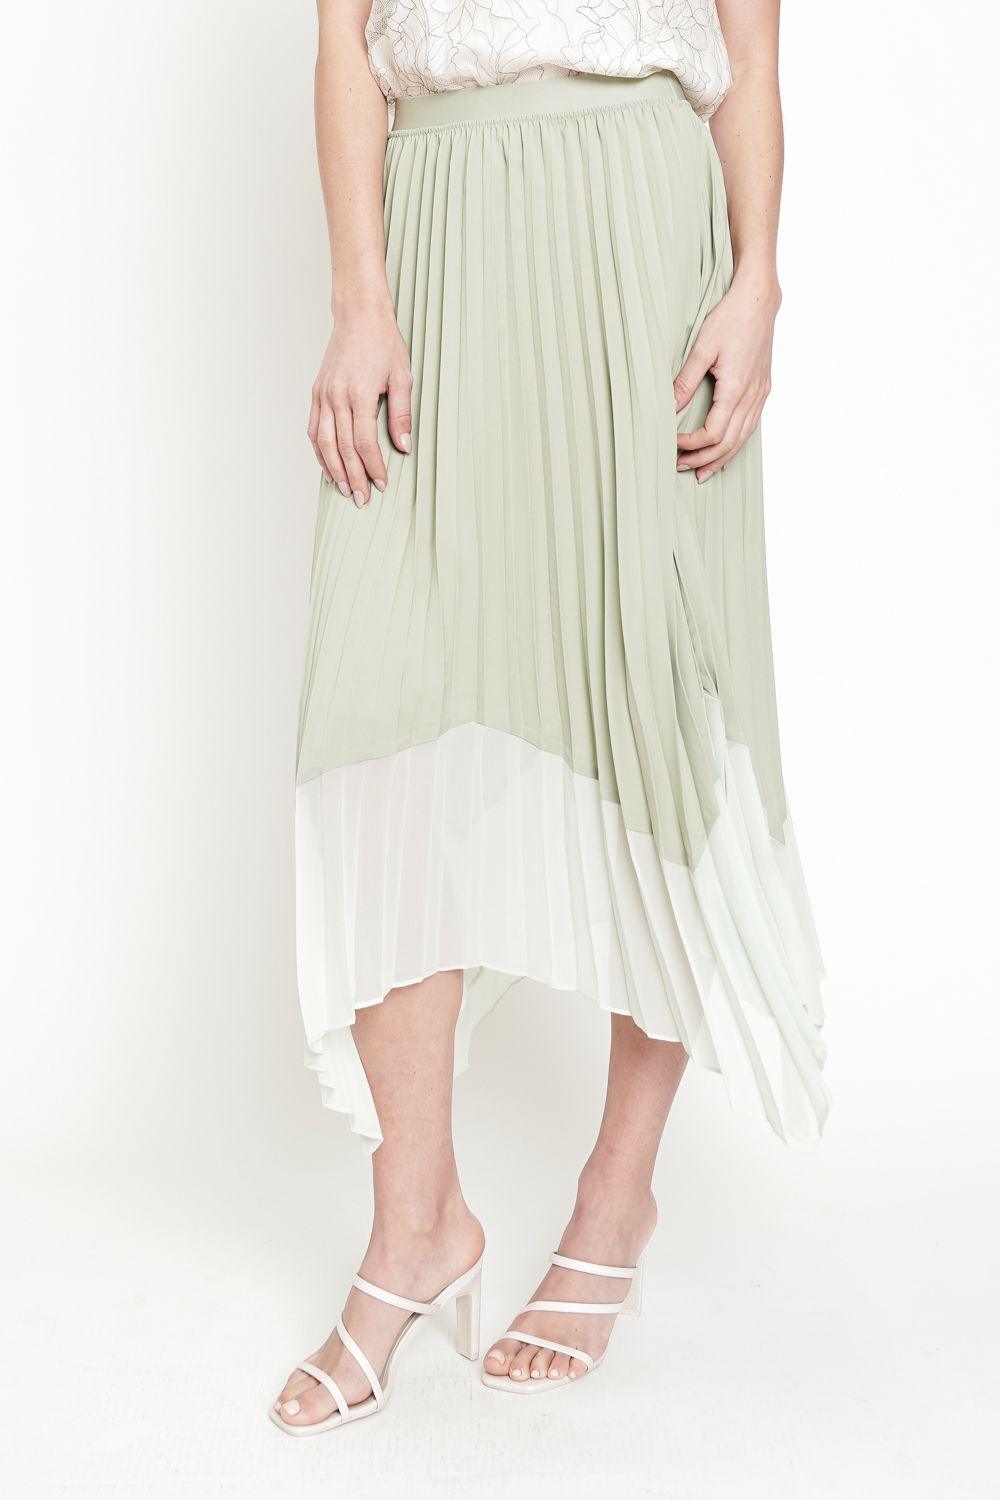 Mint Pleated Skirt - Strawberry Moon Boutique